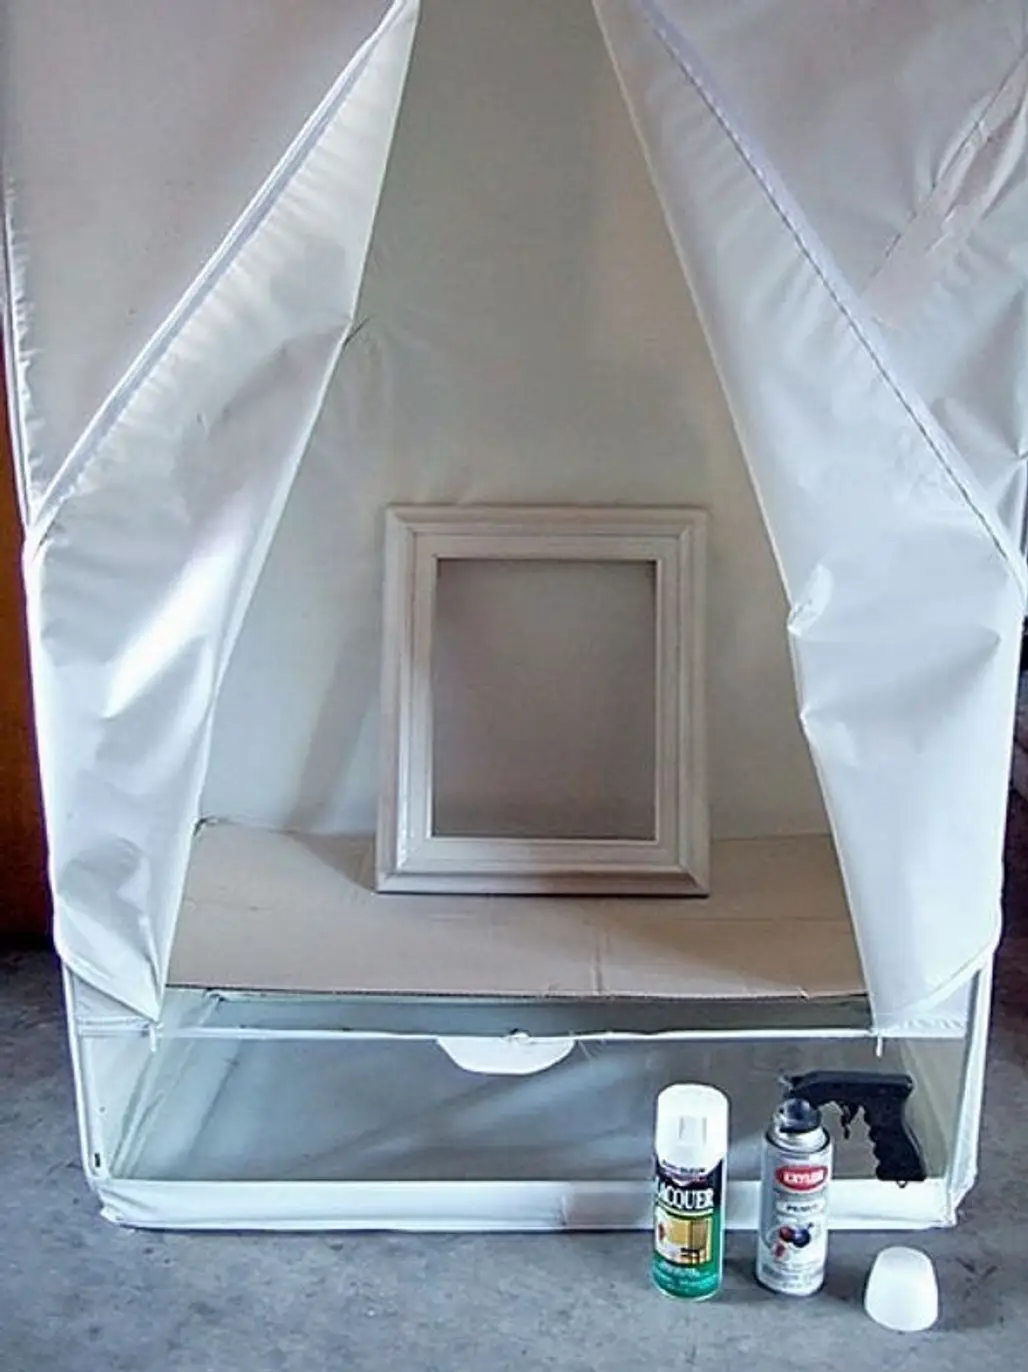 tent,product,furniture,